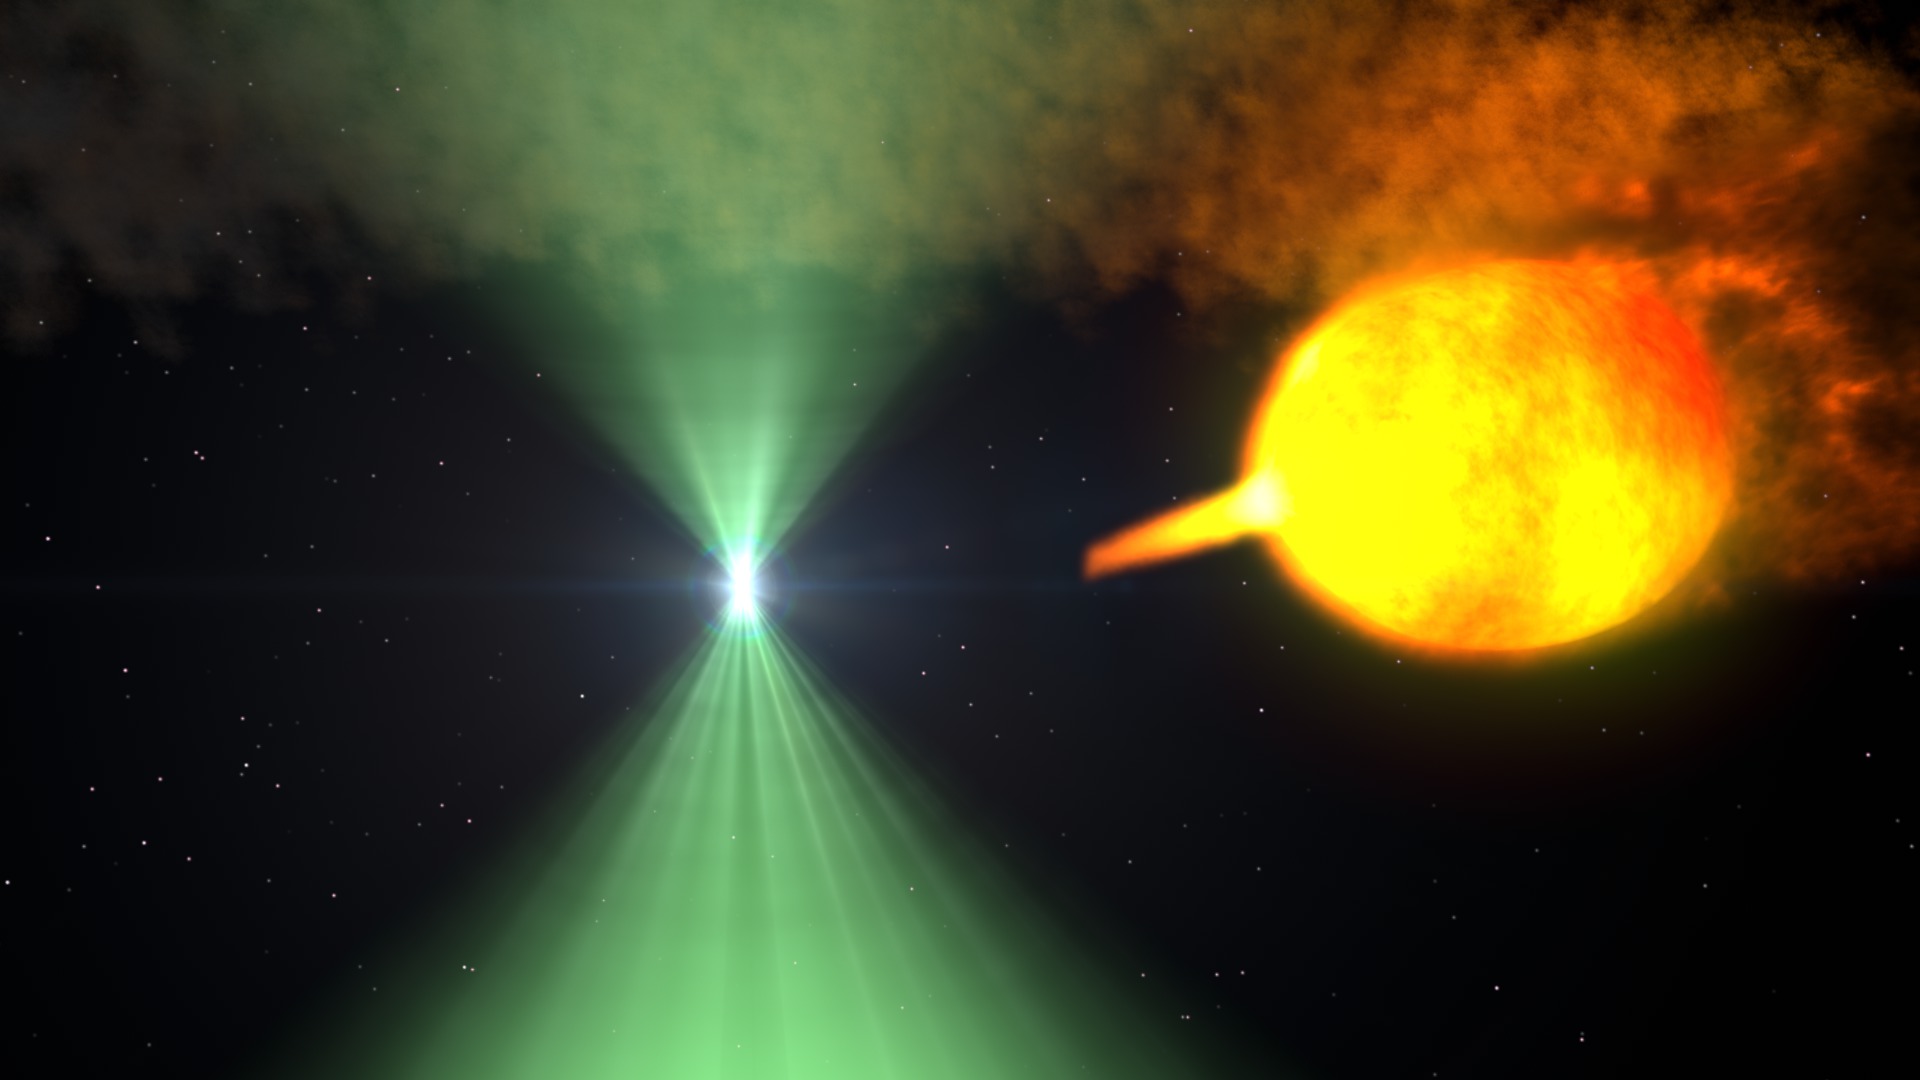 This animation illustrates one possible model for the dramatic changes observed from J1023. The two stars of AY Sextantis orbit closely enough that a stream of gas flows from the sun-like star toward the pulsar. The pulsar's rapid rotation and intense magnetic field produce both the radio beam and the high-energy wind, which is eroding its companion. When the radio beam (green) is detectable, the pulsar wind holds back the companion's gas stream, preventing it from approaching too closely. Now and then the stream surges, reaches toward the pulsar and establishes an accretion disk. Processes involved in producing the radio beam are either shut down or, more likely, obscured. Meanwhile, some of the gas falling toward the pulsar may be accelerated outward at nearly the speed of light, forming dual particle jets firing in opposite directions. Shock waves within and along the periphery of these jets are a likely source of the bright gamma-ray emission (magenta) detected by NASA's Fermi Gamma-ray Space Telescope.Credit: NASA's Goddard Space Flight Center